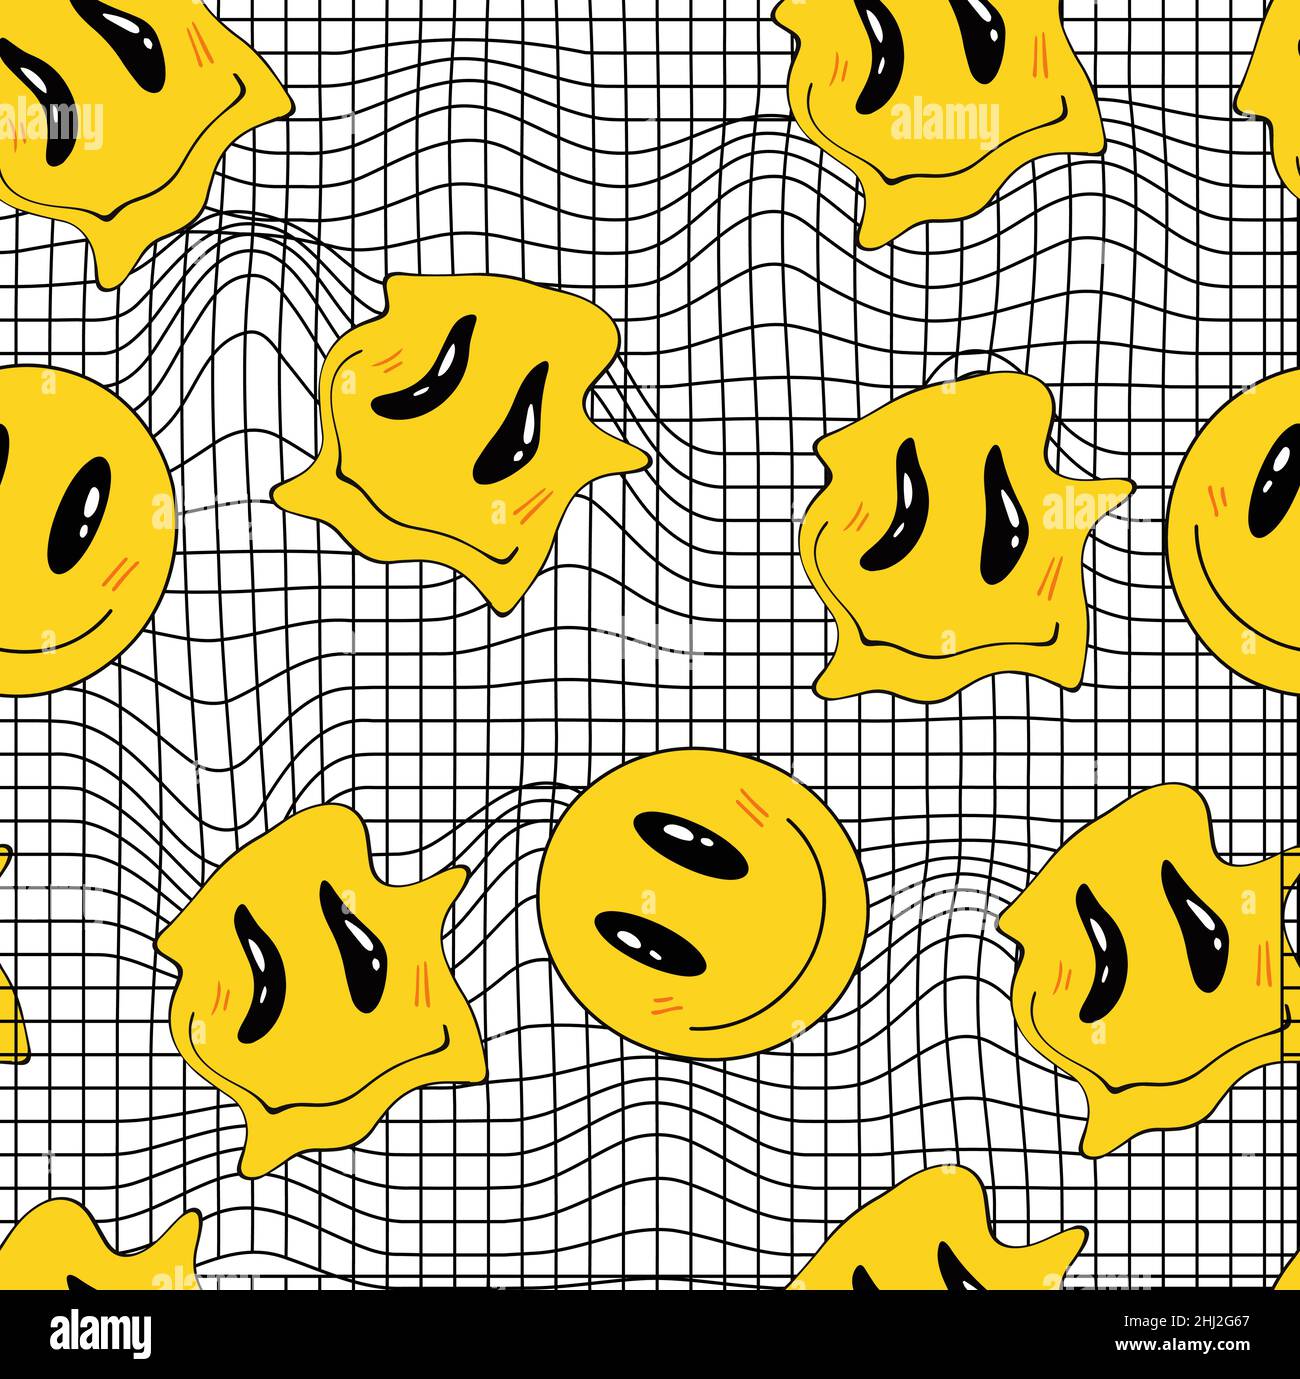 Seamless yellow distorted melting smiley face illustration pattern ...